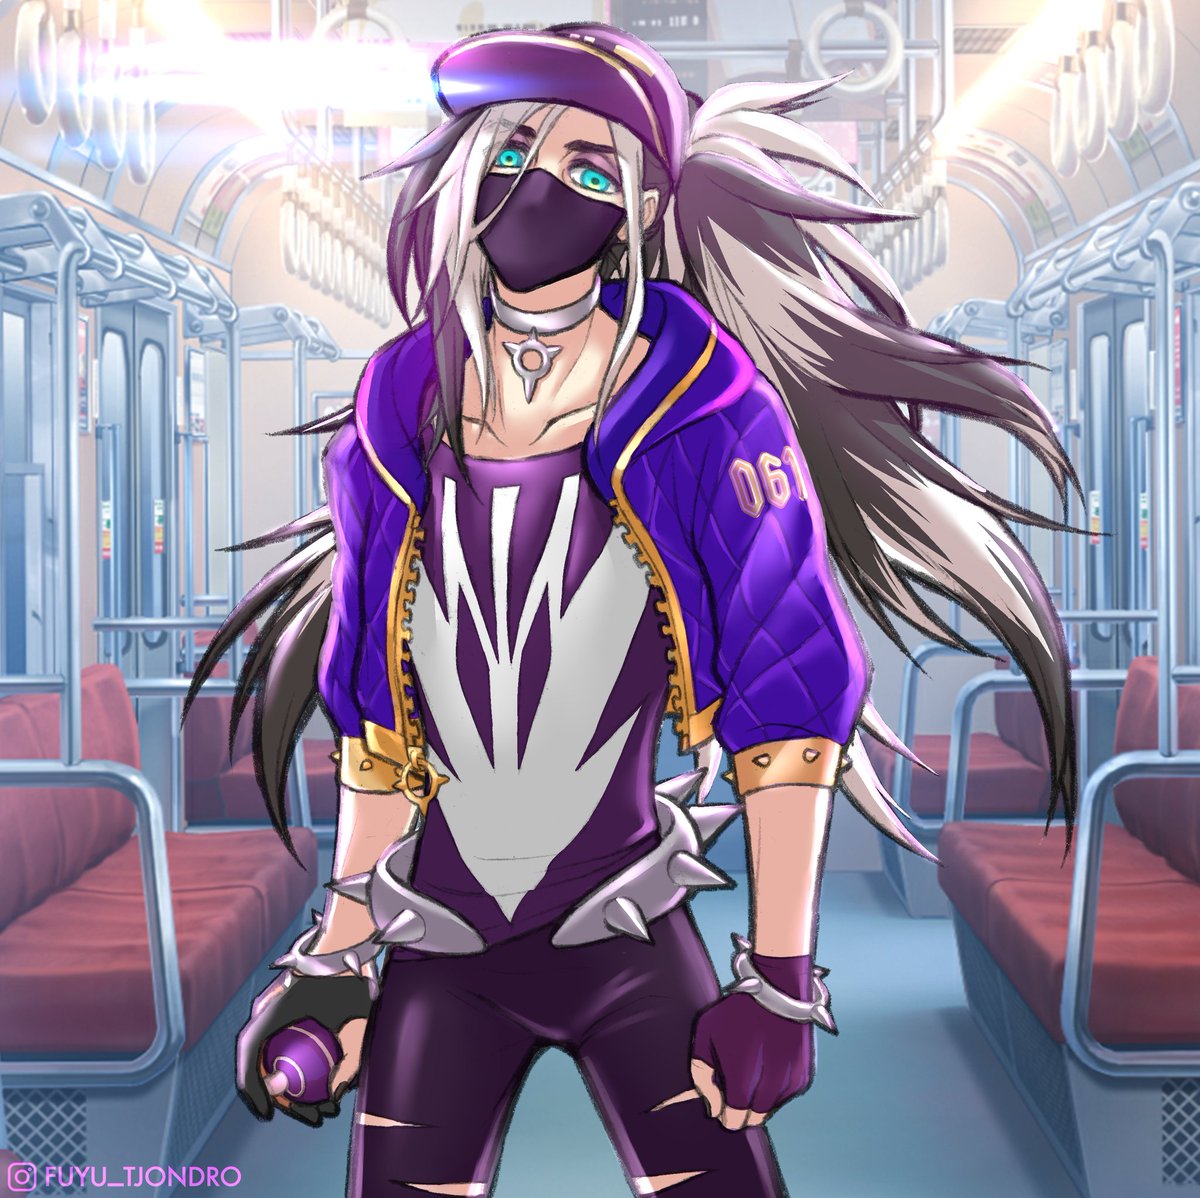 I'm Trouble and you're wantin' it!. K/DA AKALI x PIERS Light and Negative versions.His outfit is mostly inspired by Toxtricity! . #PiersPokemon  #piers  #ネズ  #Swsh  #pokemonSwSh  #Akali  #KDA  #popstars  #LeagueOfLegends  #LOL  #fanart  #rkgk  #crossover  #mashup